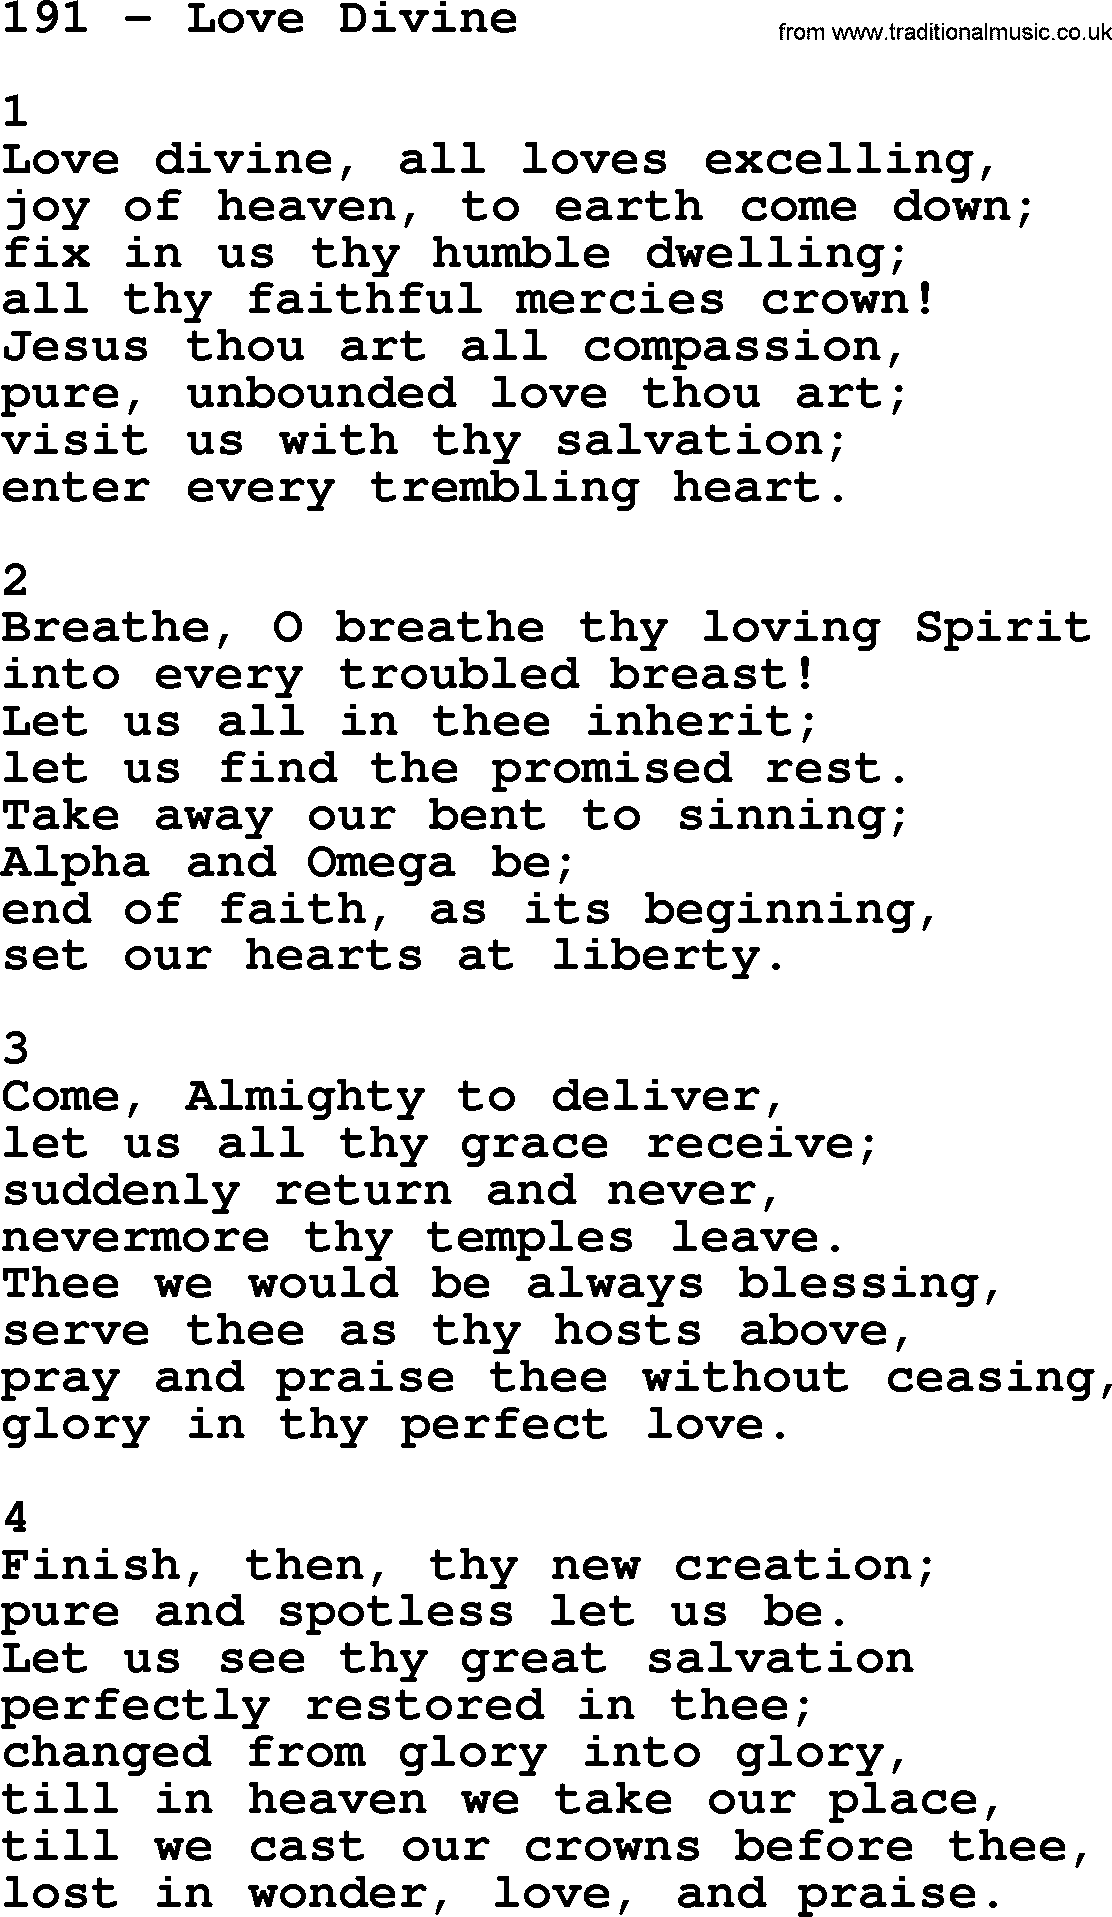 Complete Adventis Hymnal, title: 191-Love Divine, with lyrics, midi, mp3, powerpoints(PPT) and PDF,